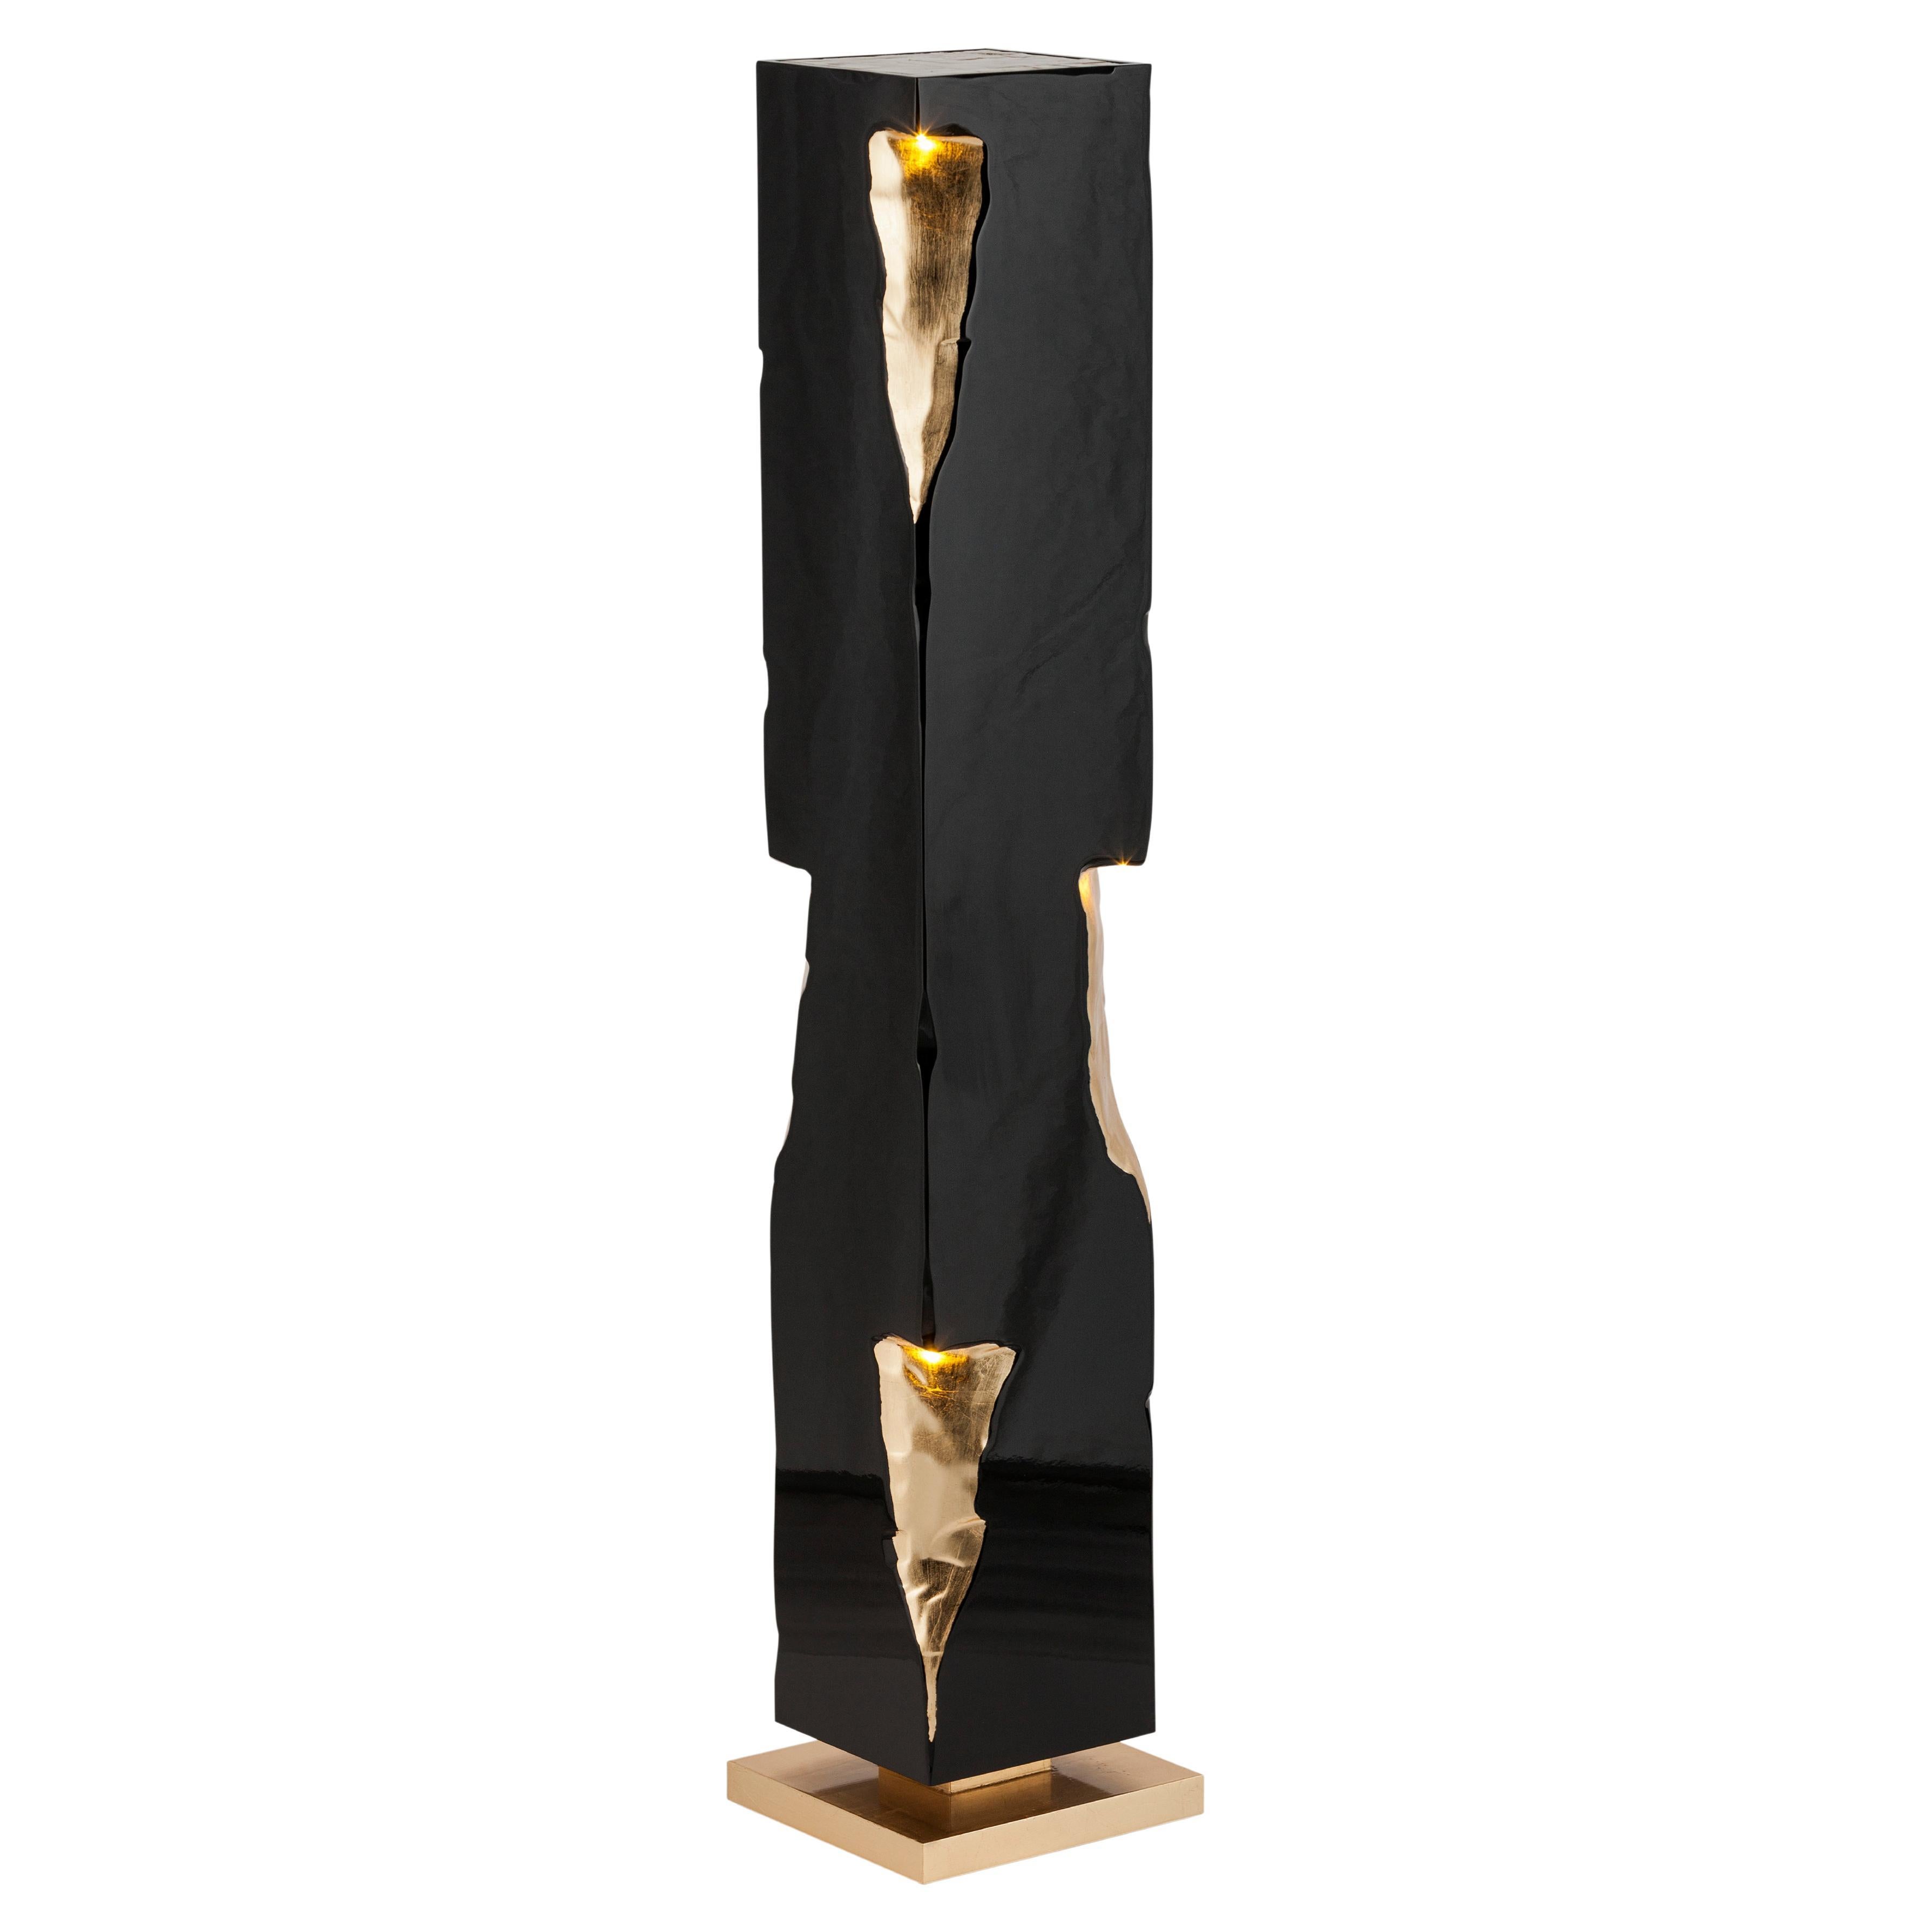 Modern Martin Black Pedestal Stand with Gold Leaf Handcrafted by Greenapple